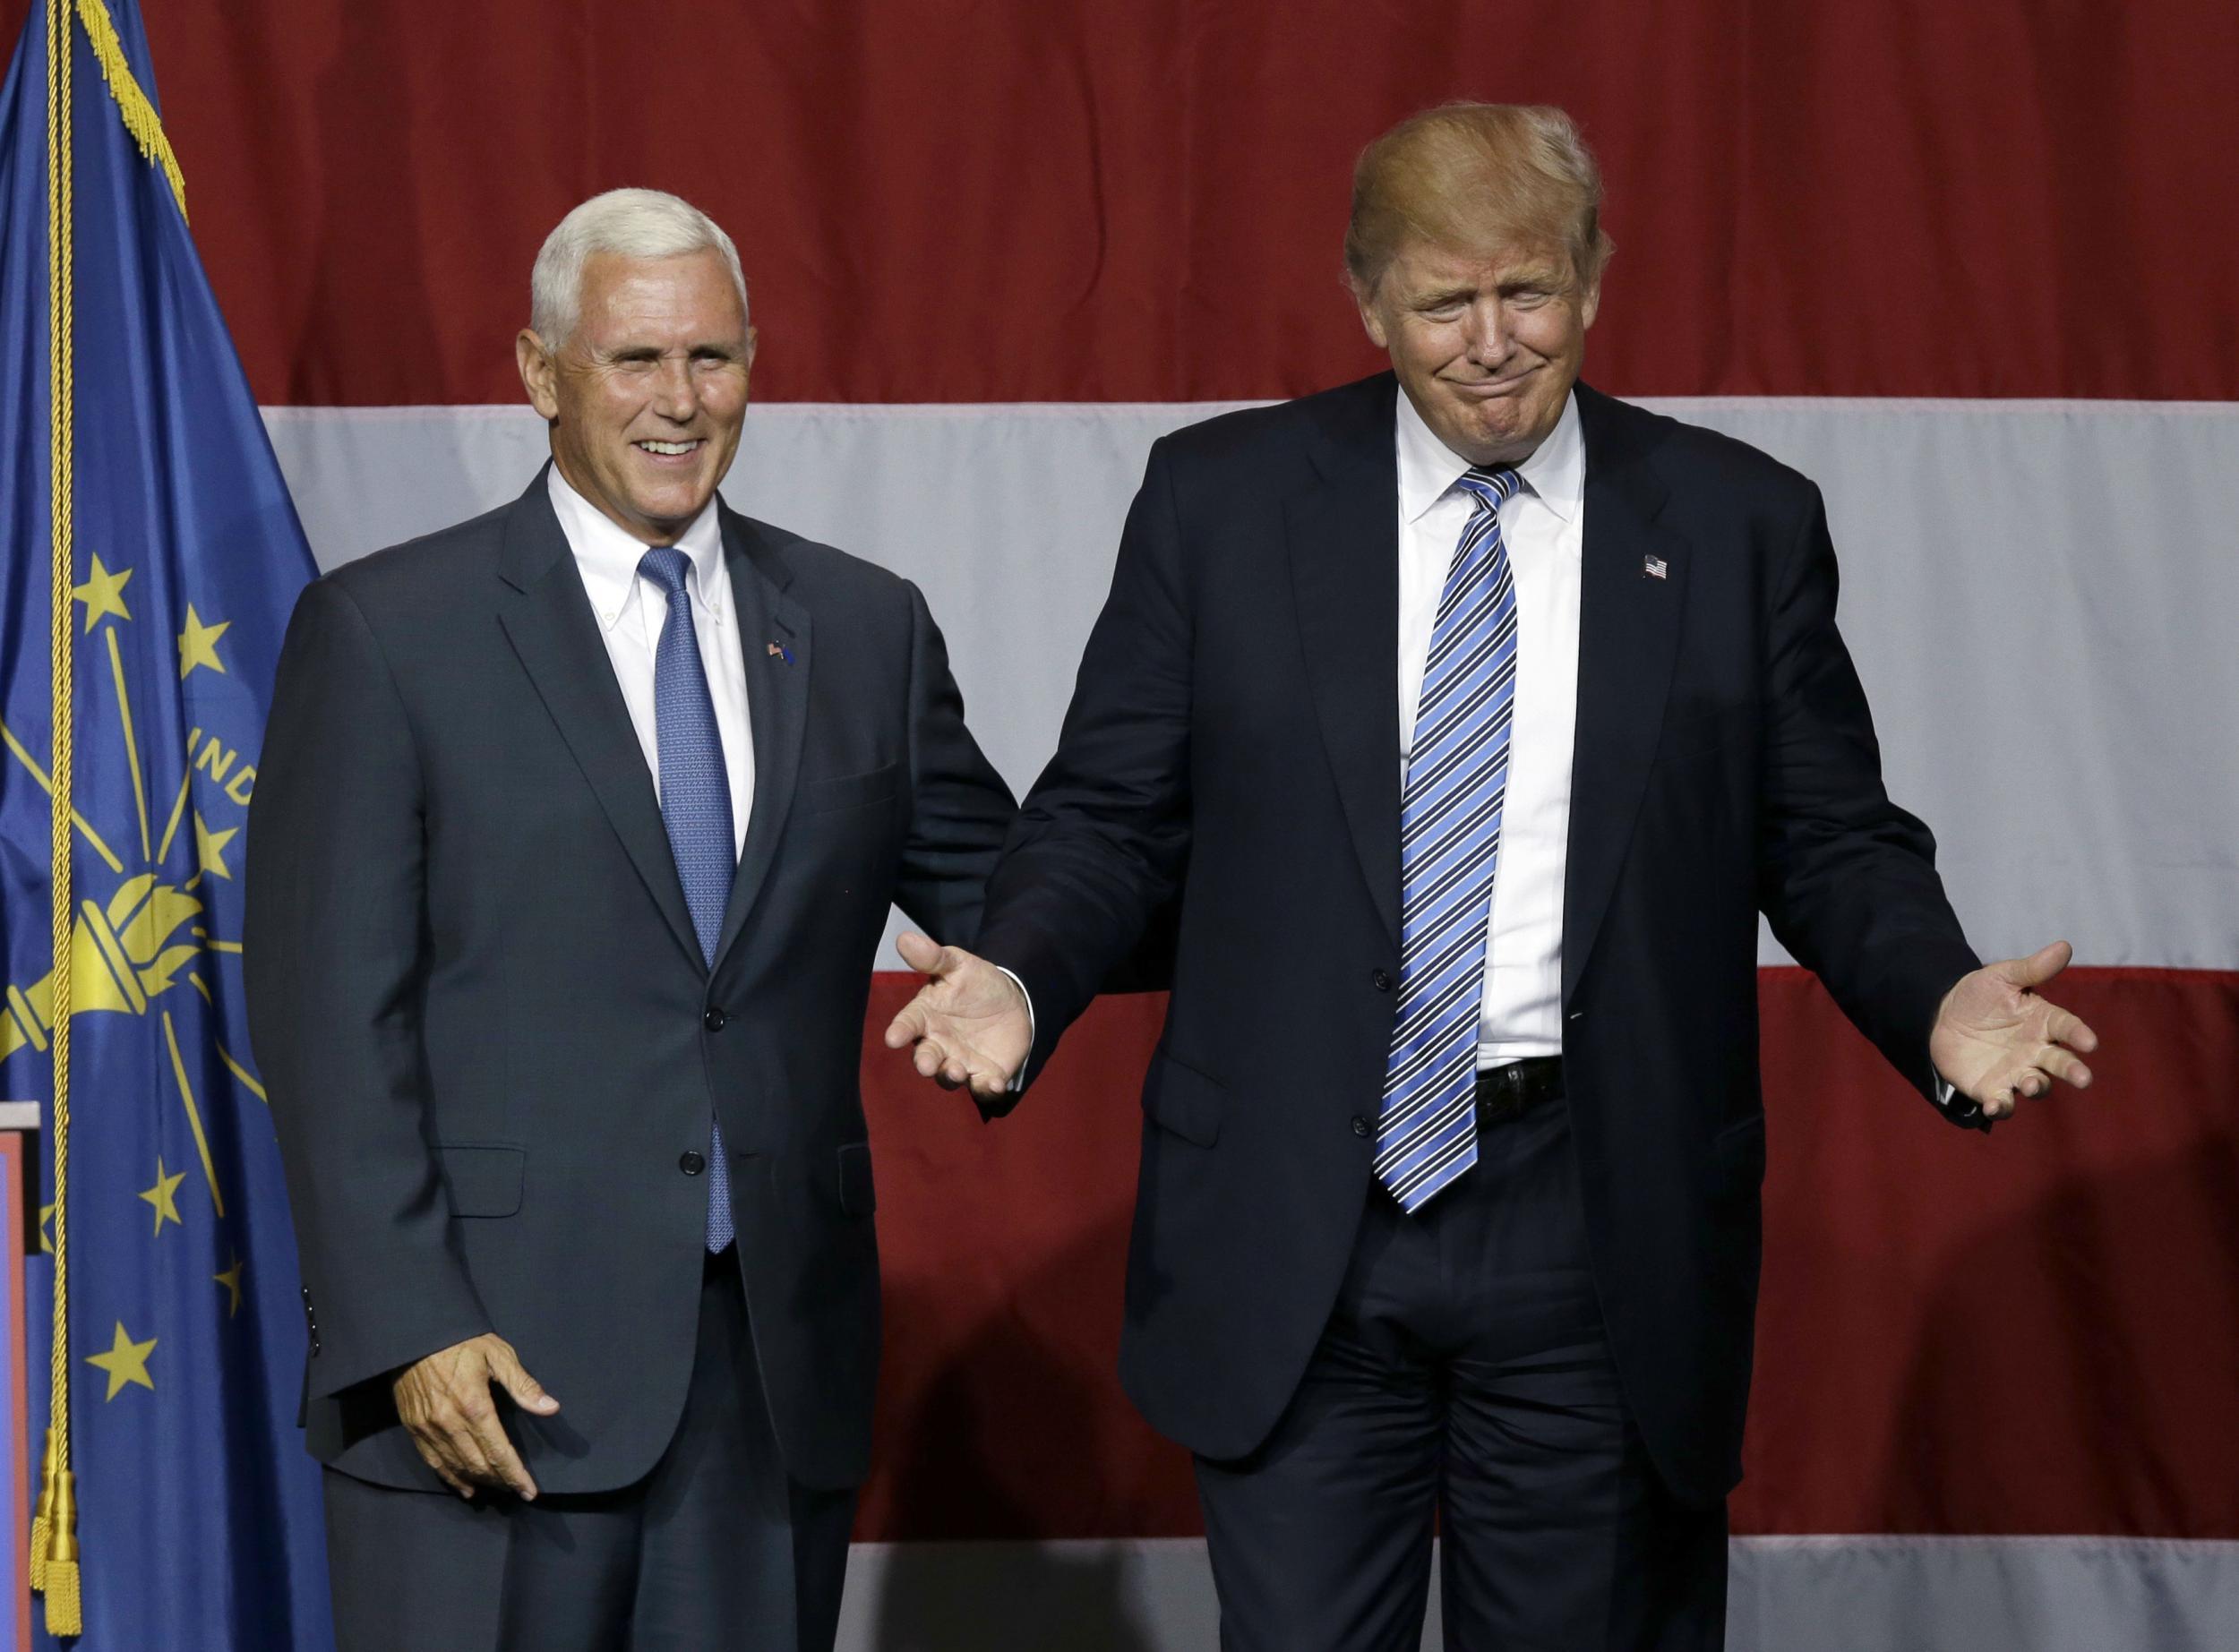 Trump and Pence appearing together earlier this year in Indiana